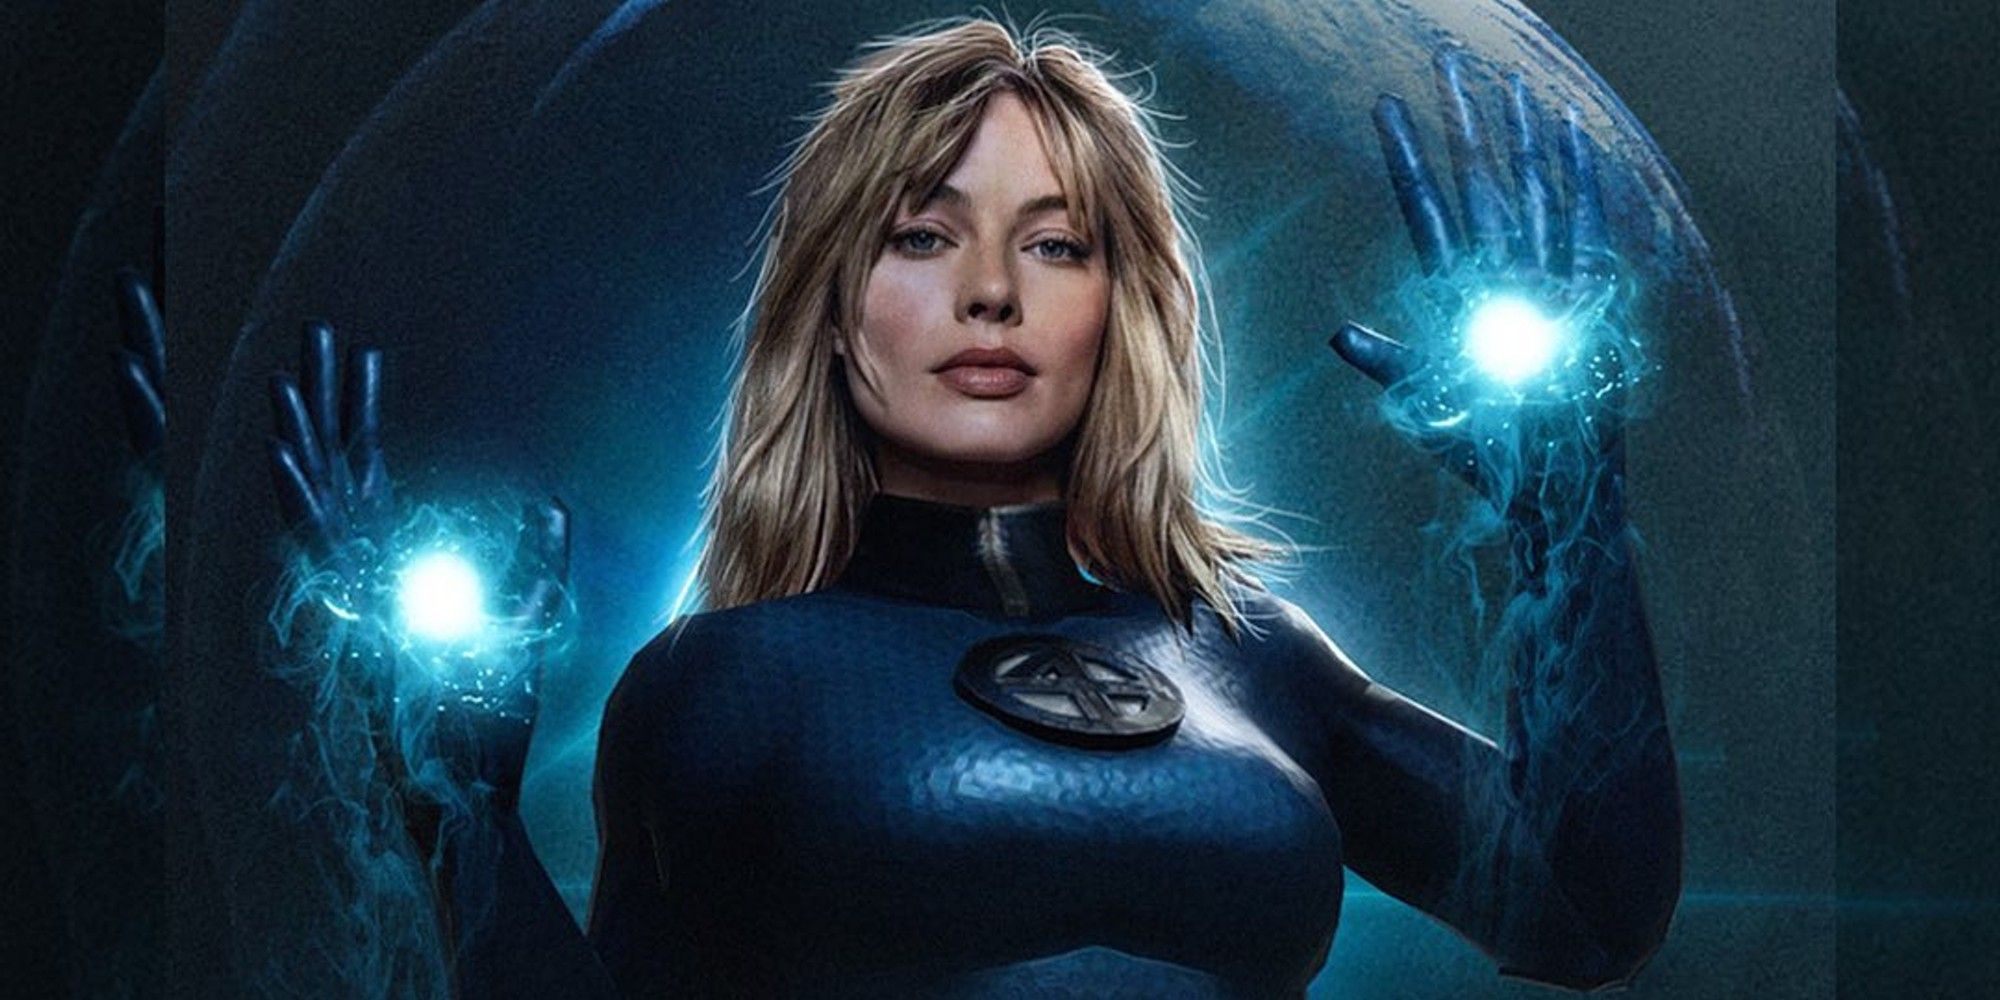 Fan art imagining Margot Robbie as Sue Storm in Marvel Studios' Fantastic Four movie, she's in her full suit and her hands are glowing from the use of her powers.